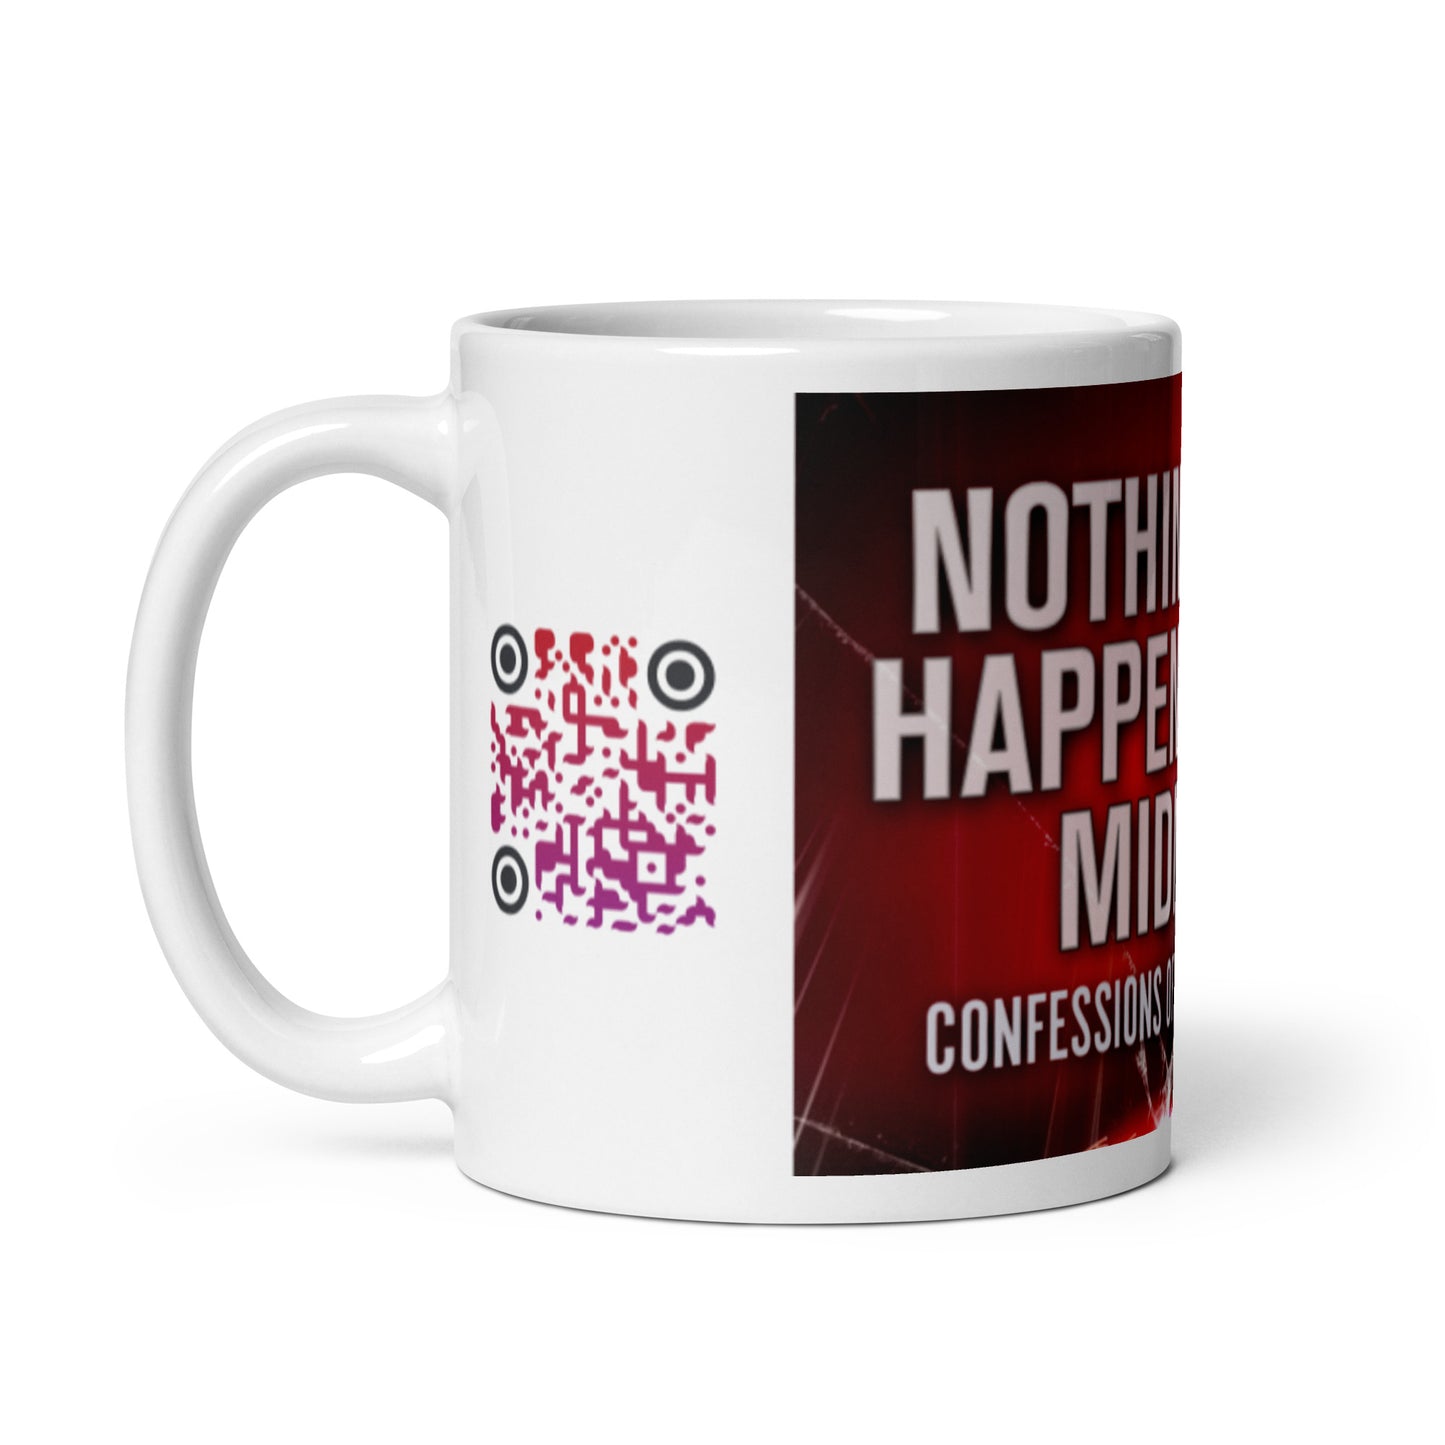 Nothing Good Happens After Midnight - White Coffee Mug